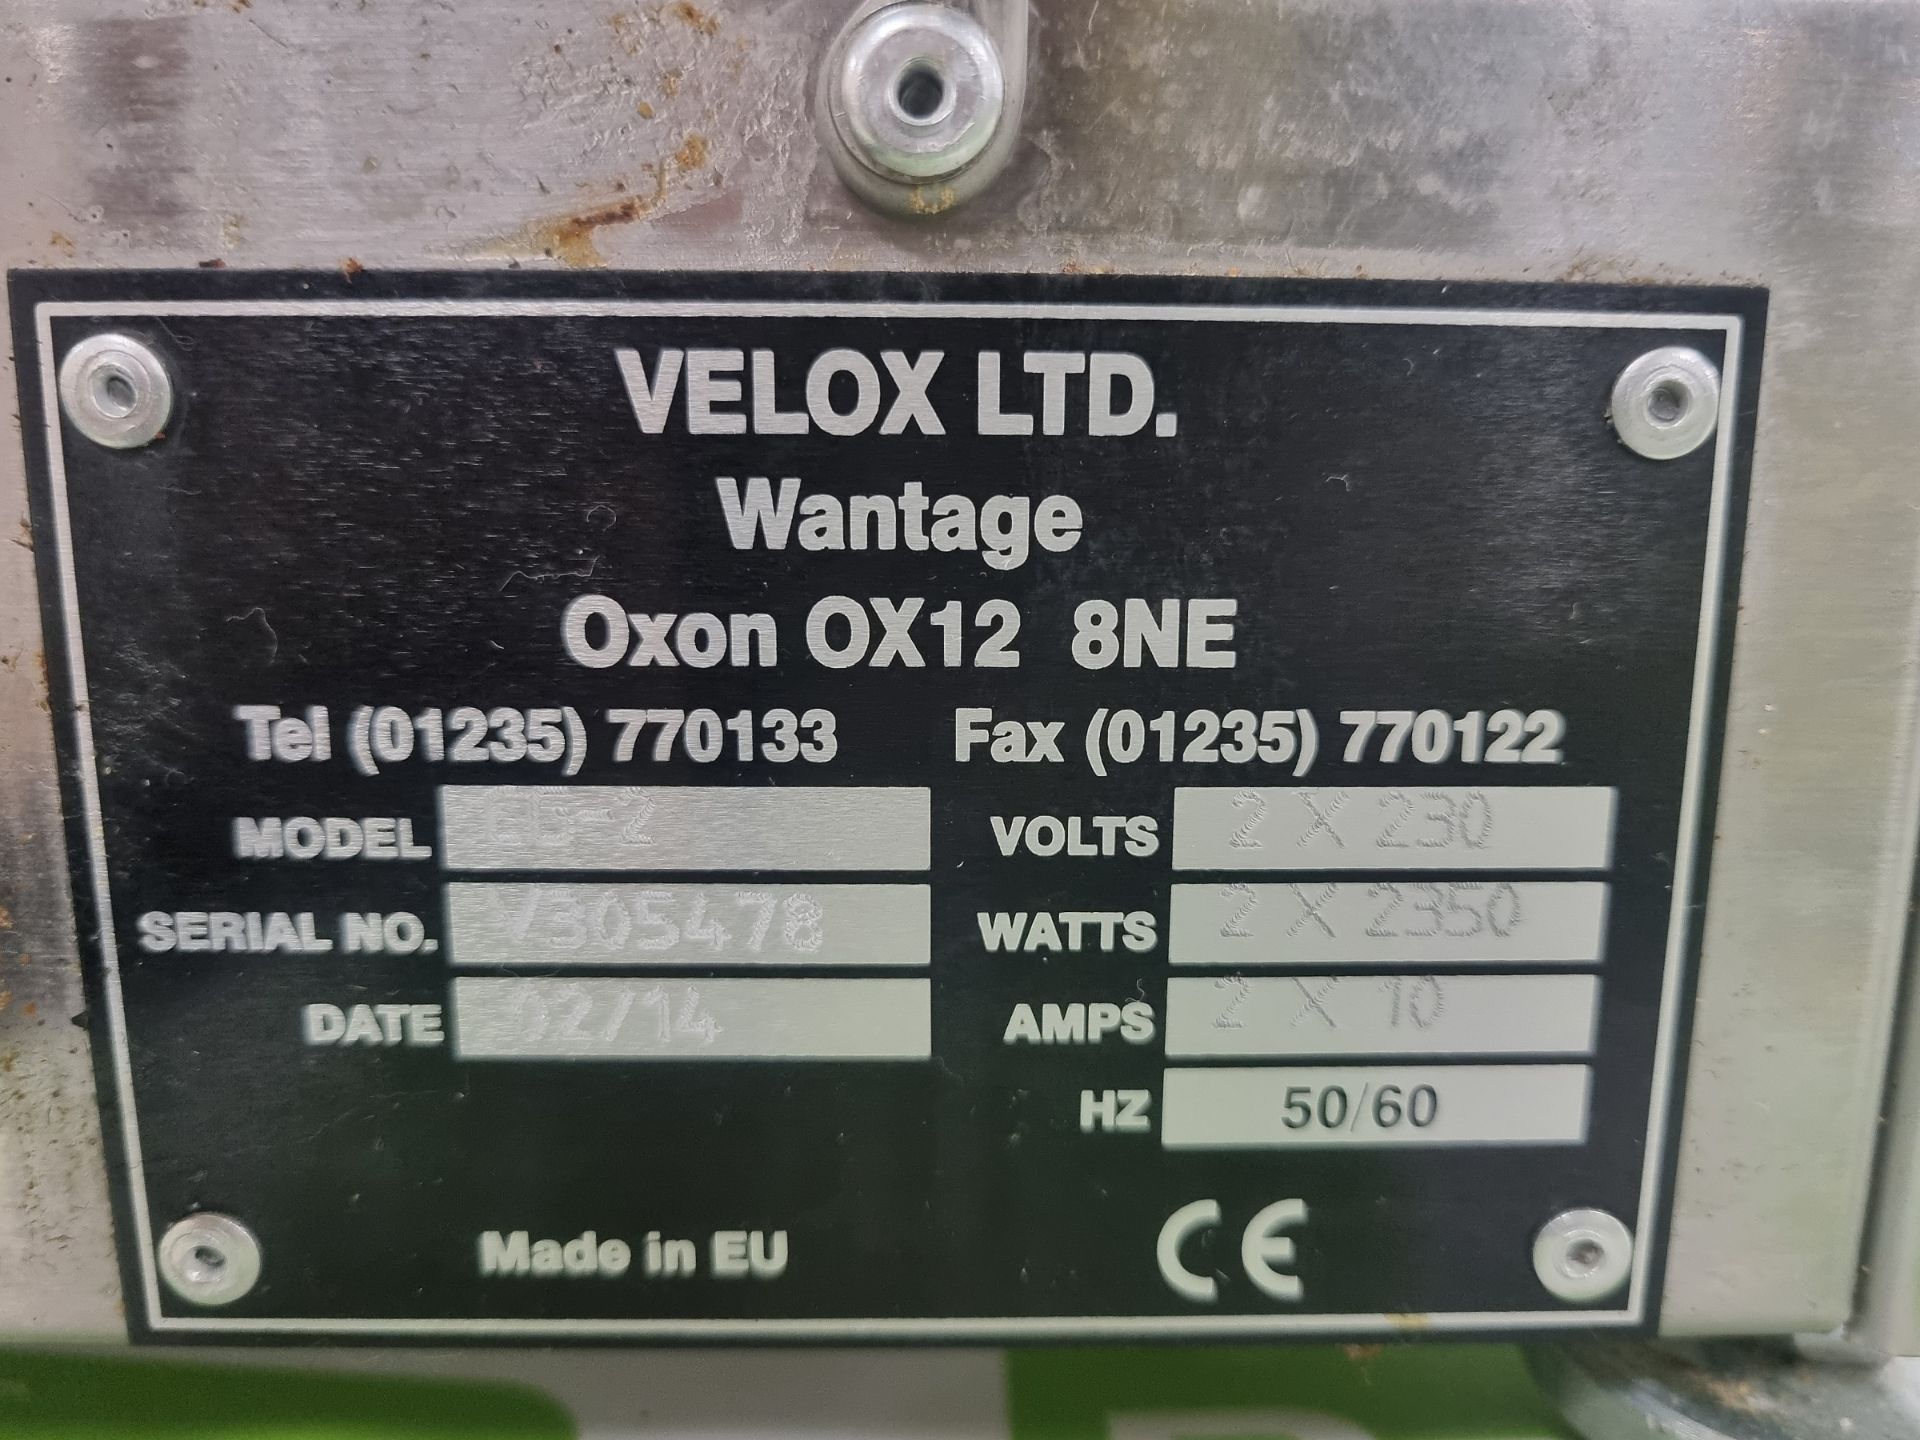 Velox CG-2 twin contact grill 2 x 230 volts 2 x 2350 watts 50/60hz - Image 6 of 6